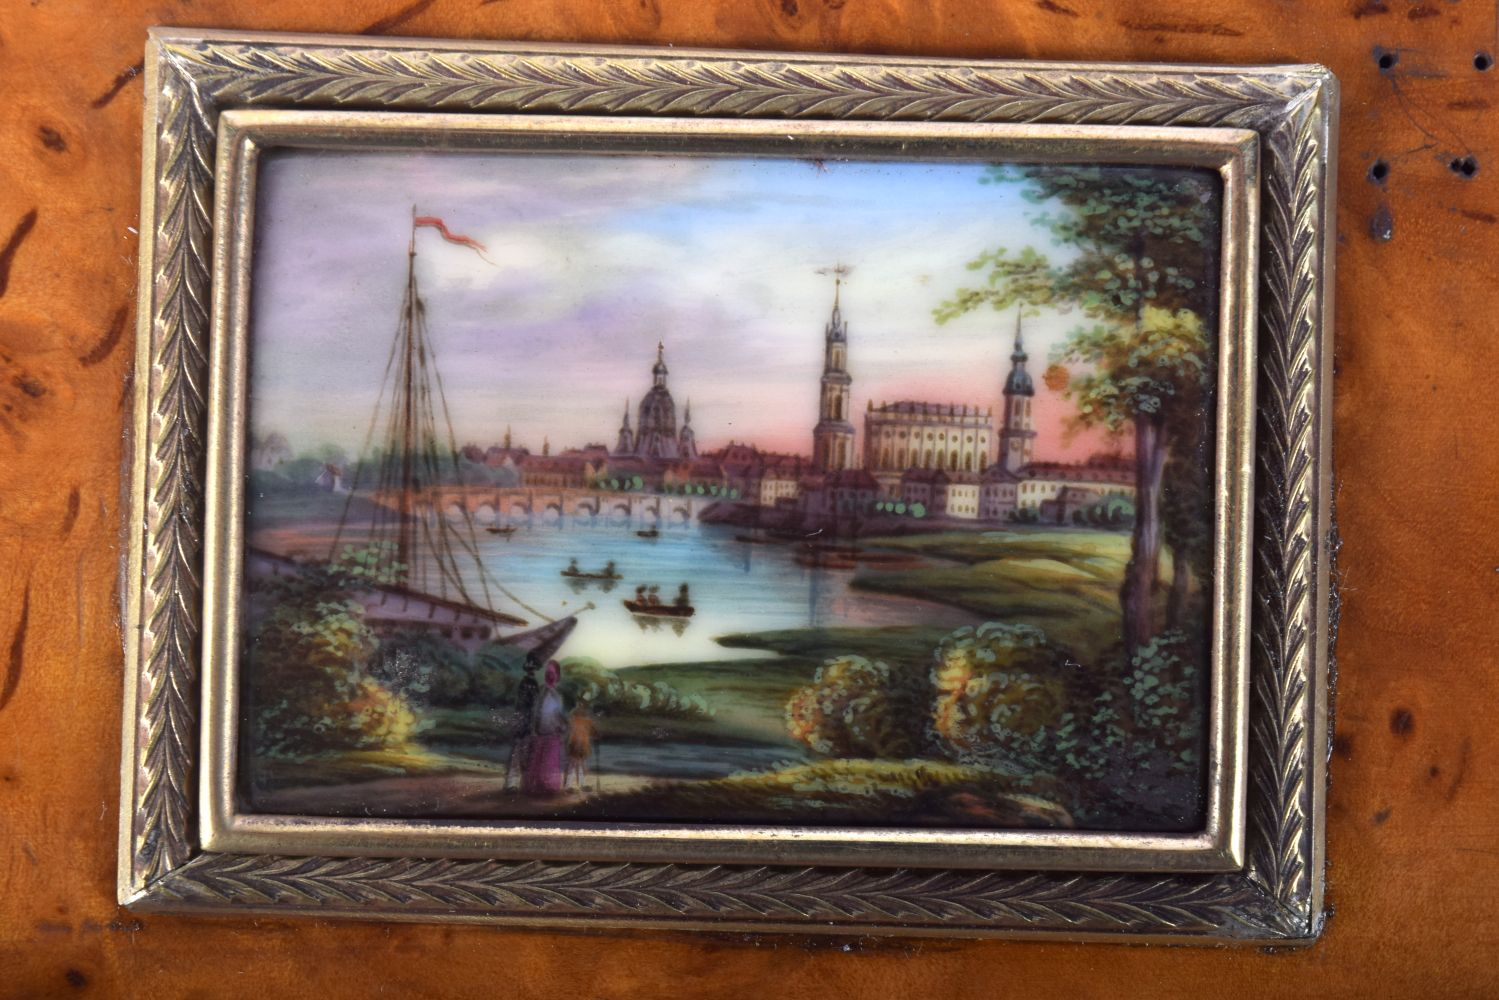 A RARE 19TH CENTURY RUSSIAN SILVER PORCELAIN AND WOOD BOX painted with a lake scene. 63 grams. 9 cm - Image 2 of 5